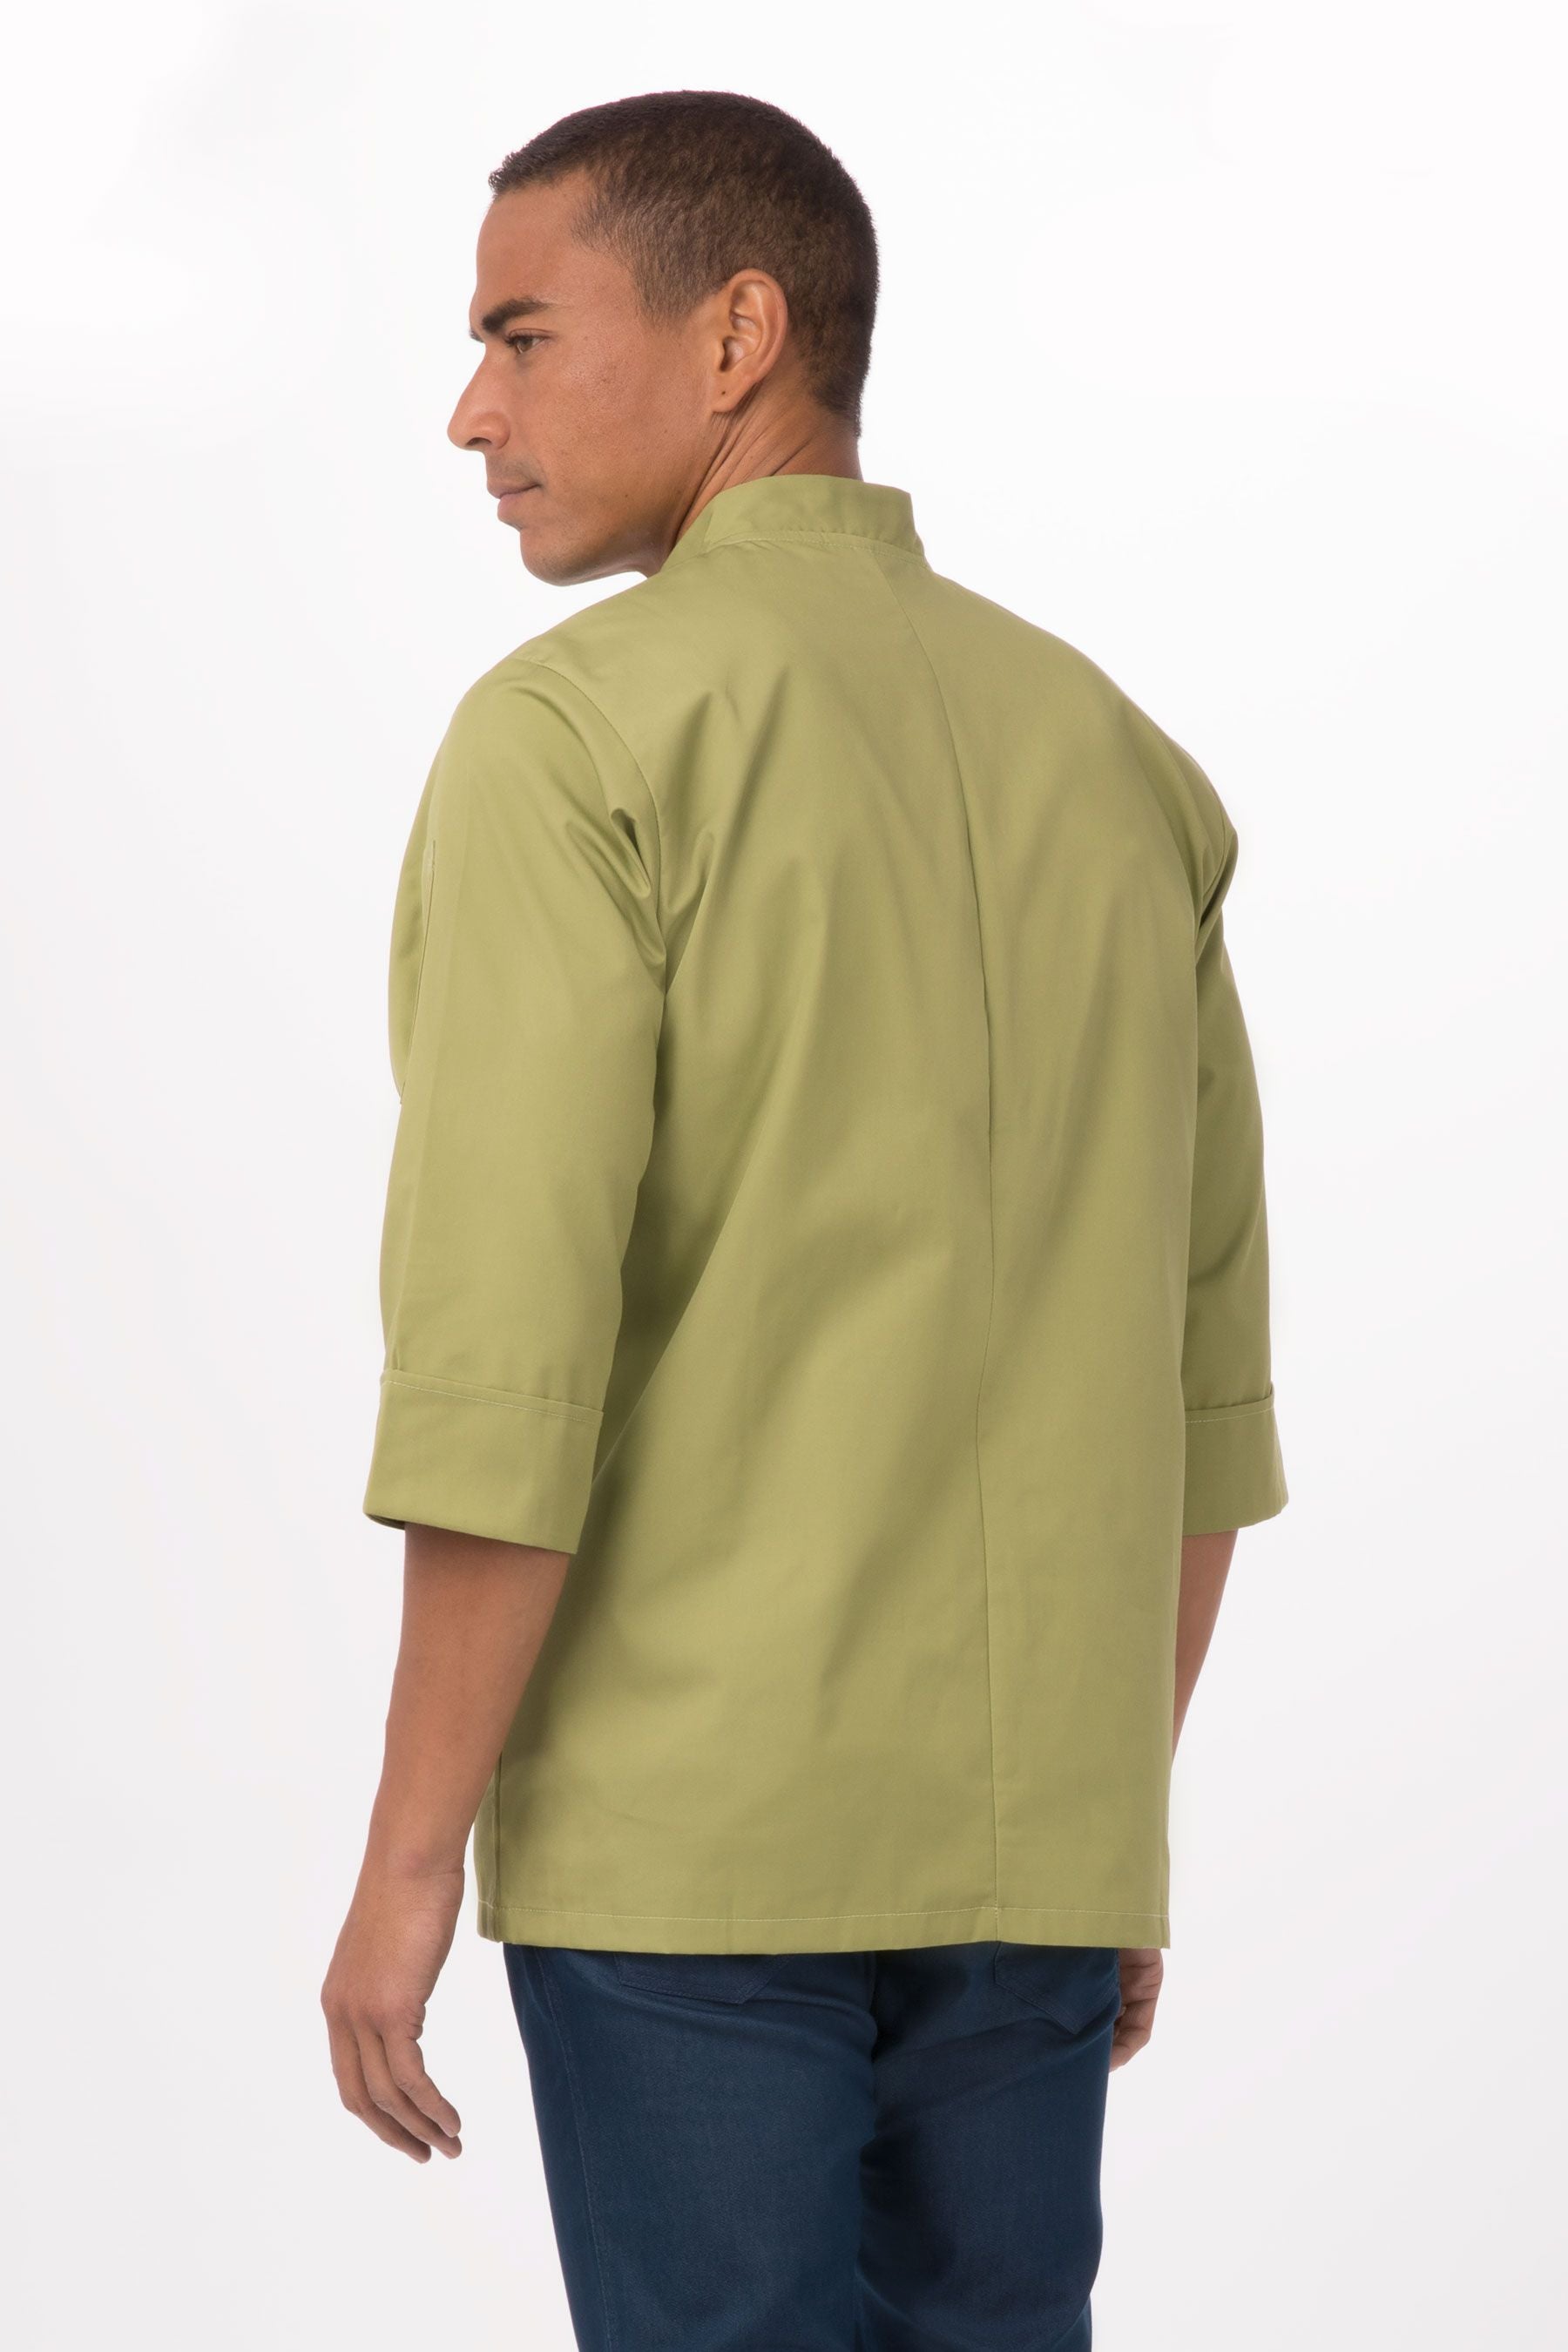 chef works-morocco-chef-coat-lime-green